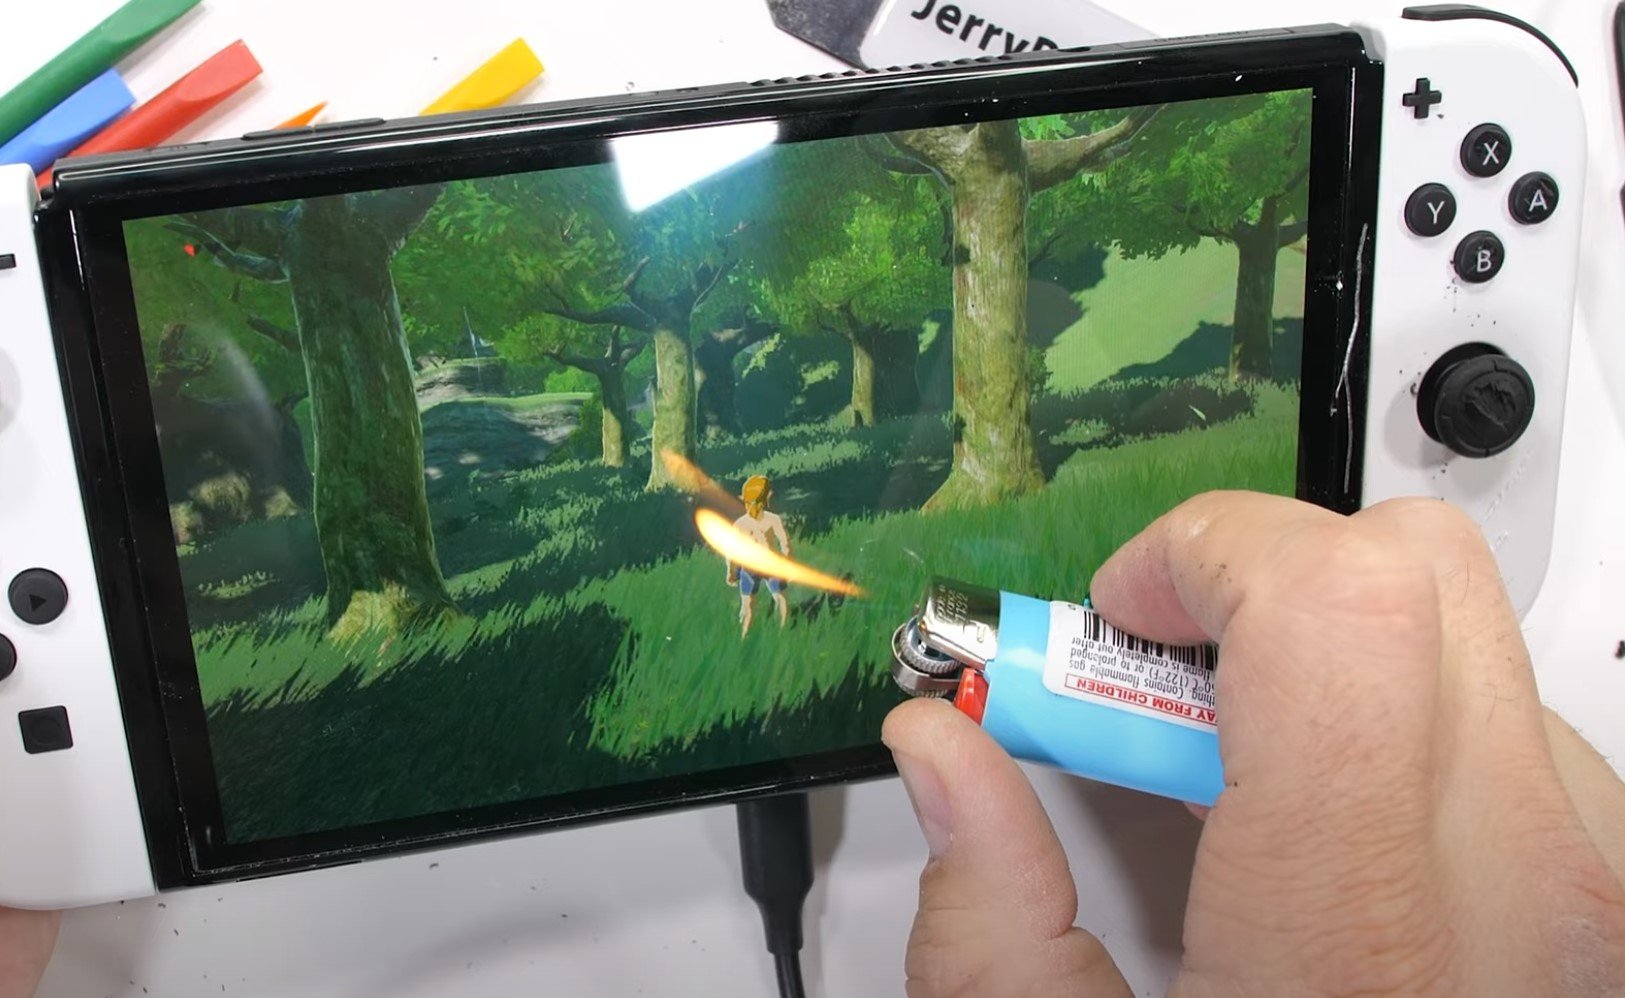 Switch OLED durability test rates its screen 2/10 for scratch protection - Video Games Chronicle